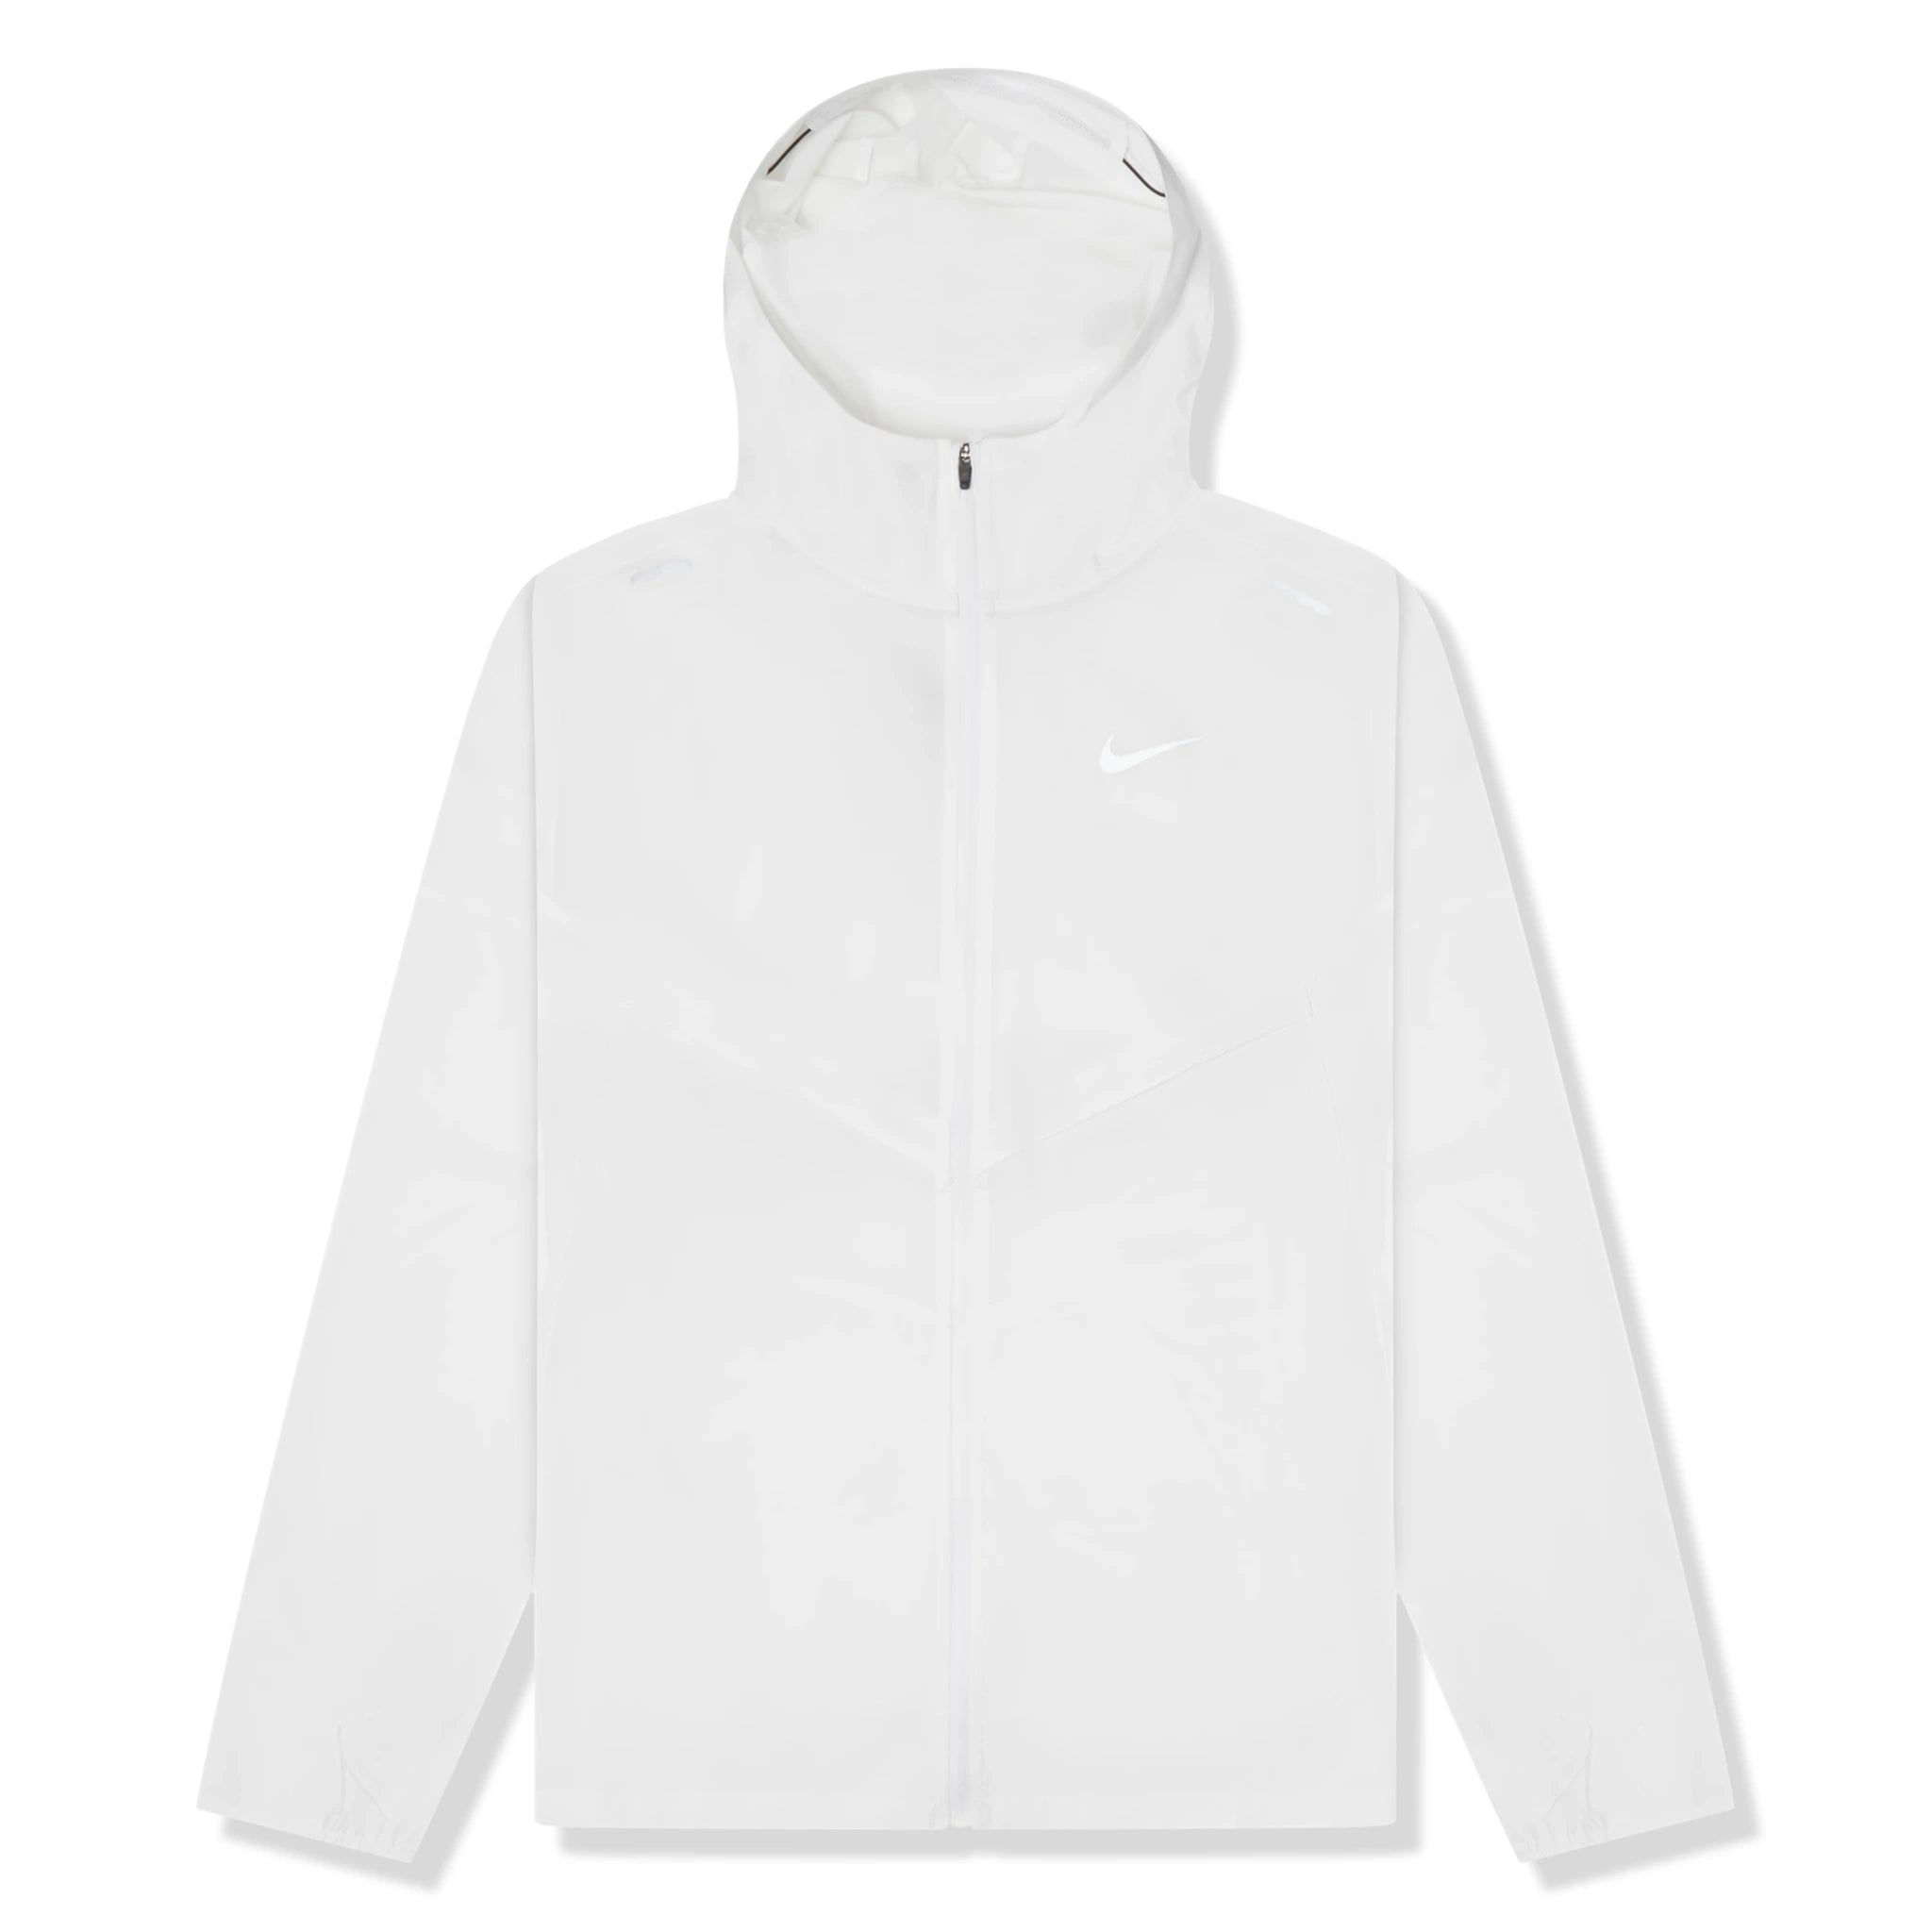 Front view of Nike Repel Packable White Windrunner Jacket